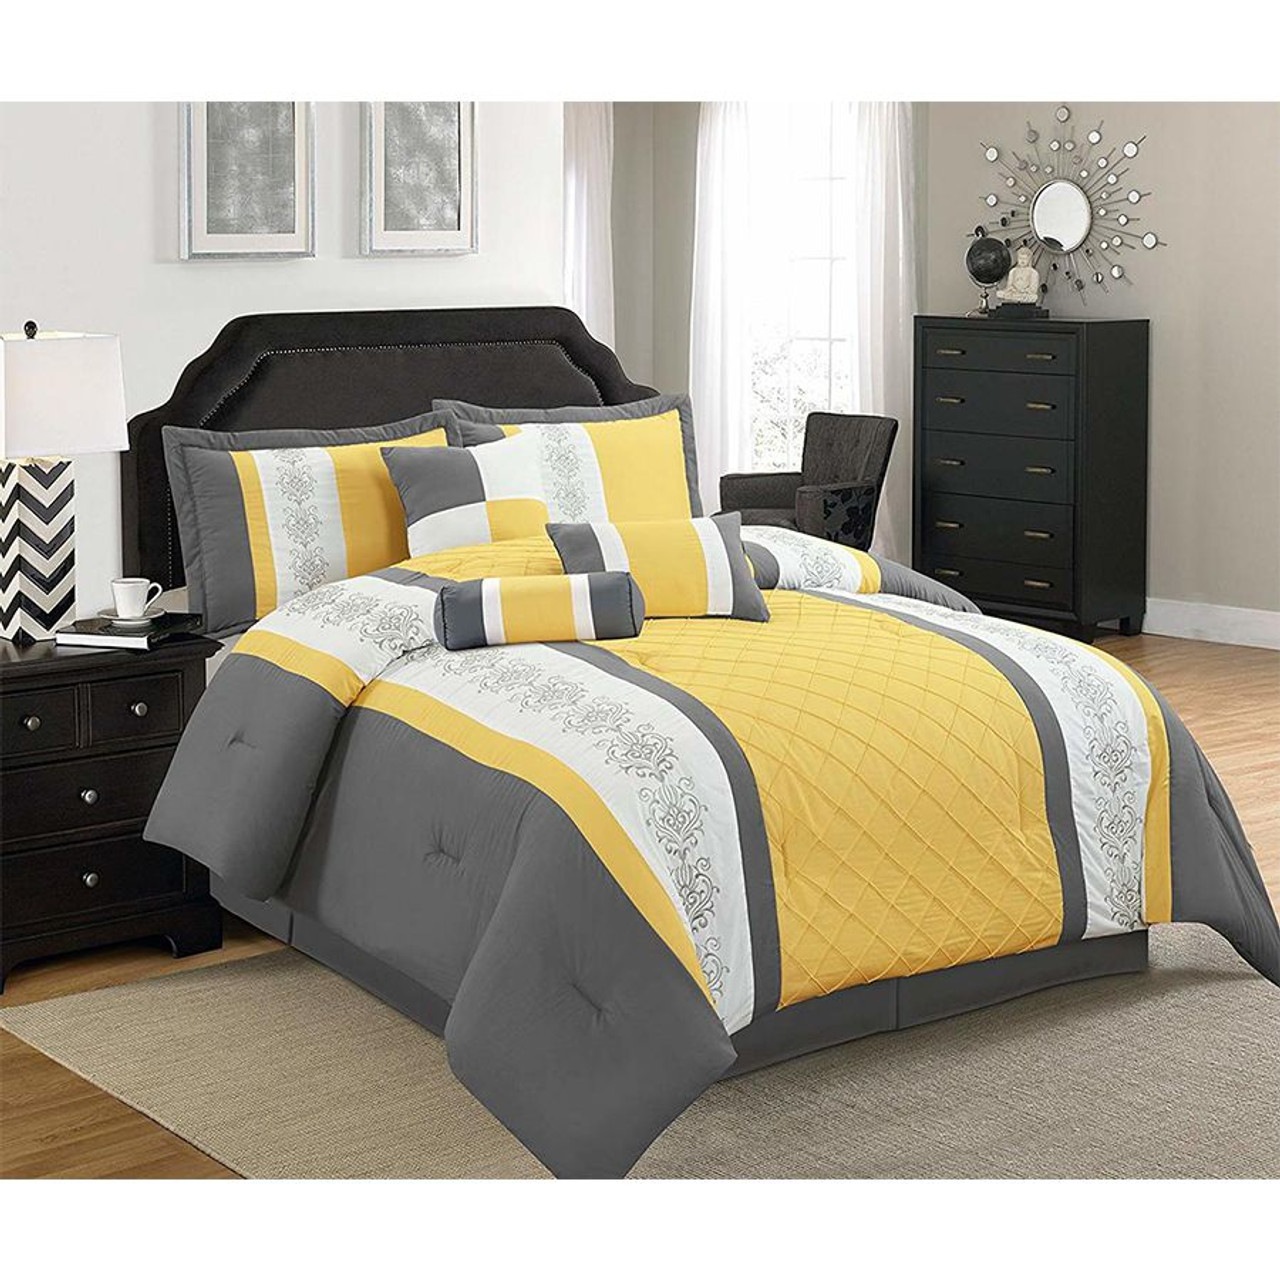 7 Pcs Comforter Set Grey Yellow Striped With Embroidered Design